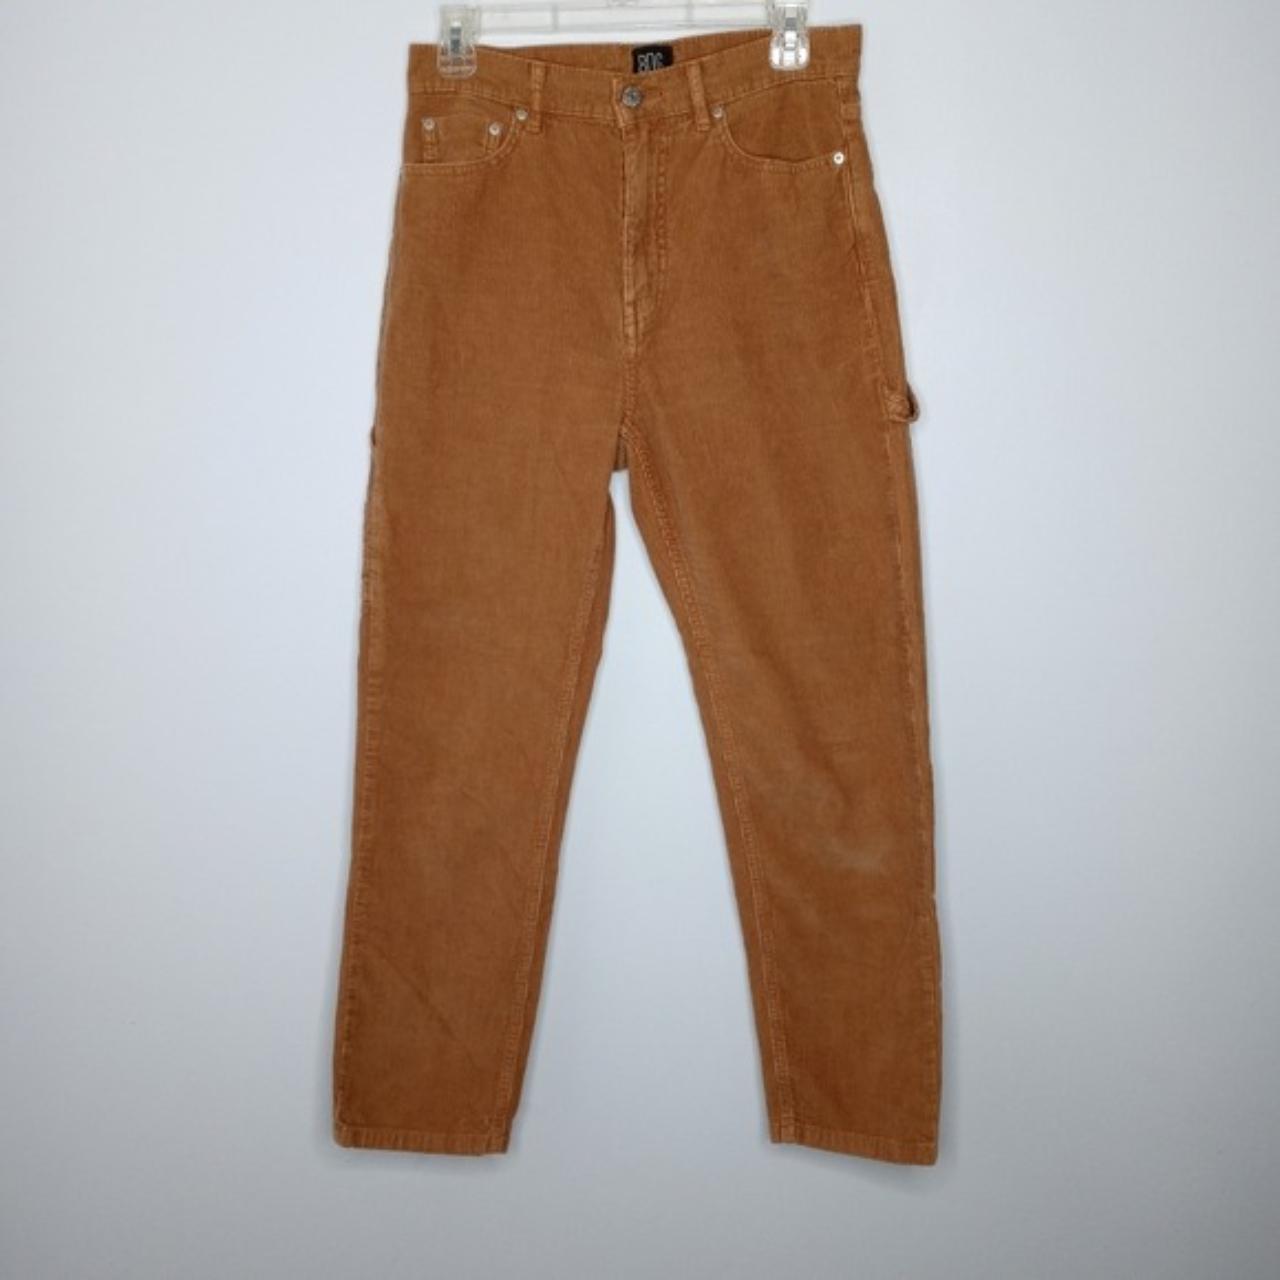 Urban Outfitters BDG Corduroy High-Waisted Slim... - Depop